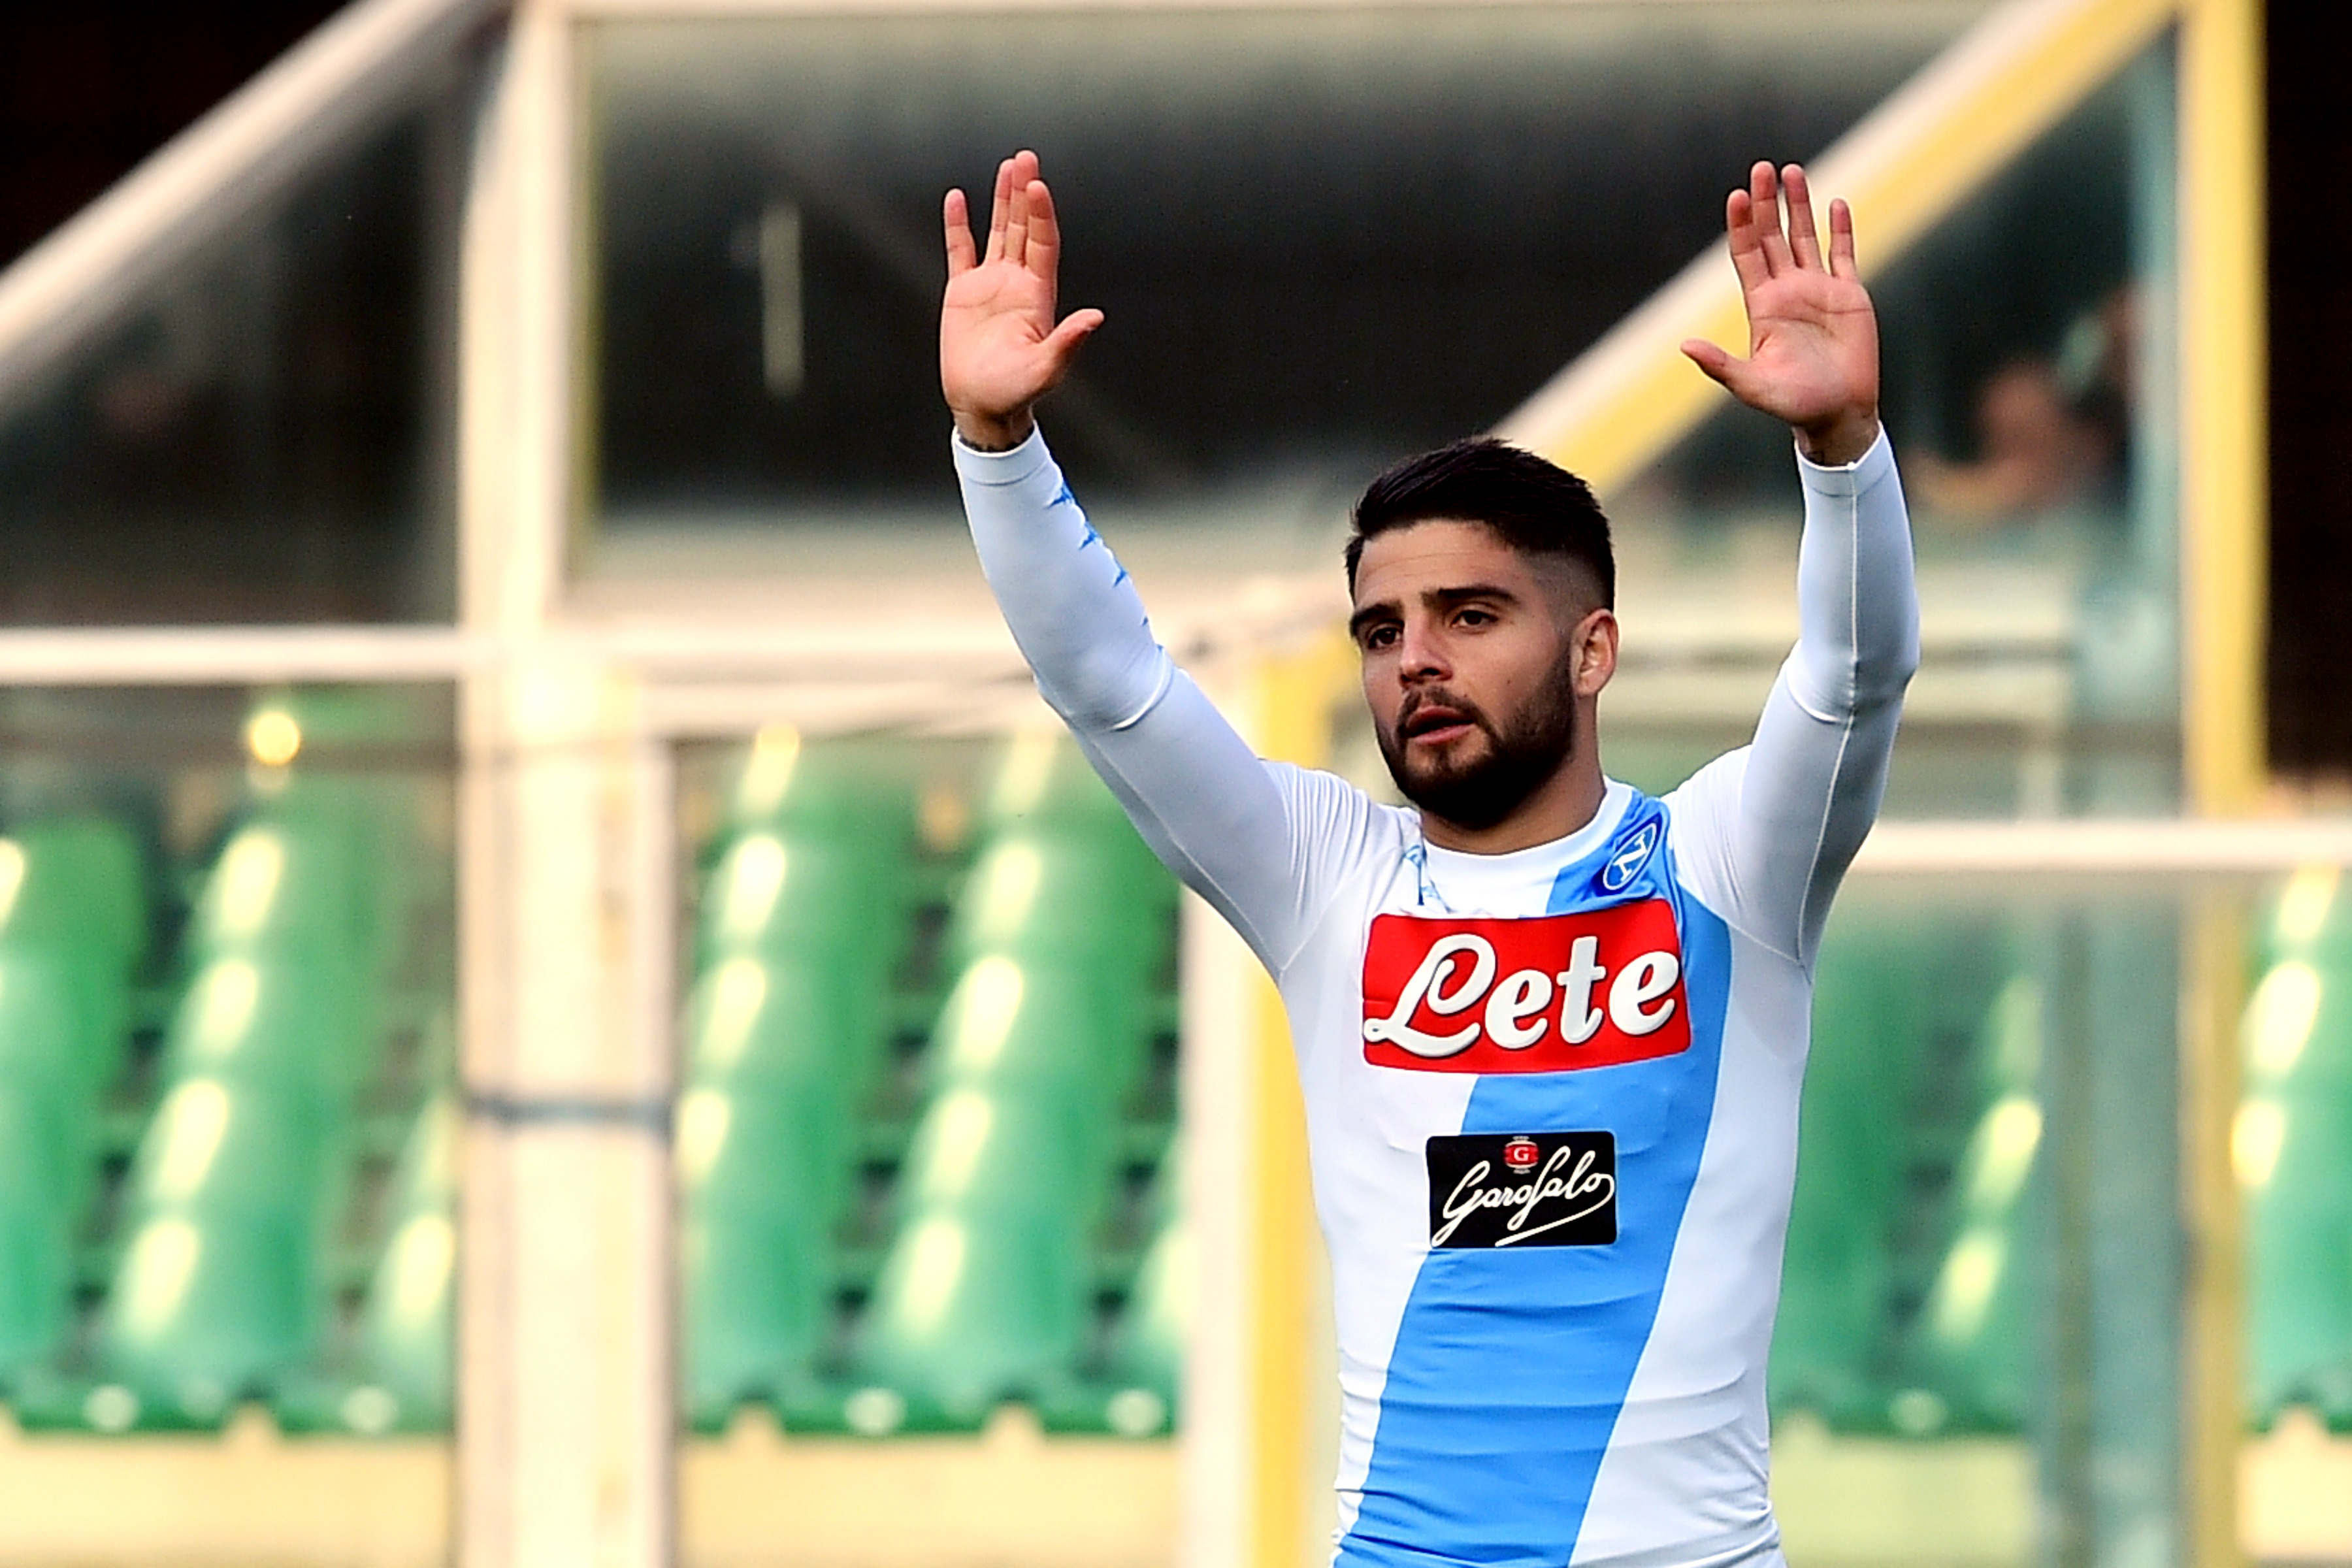 Napoli's midfielder from Italy Lorenzo Insigne gestures during the Italian Serie A football match Chievo vs Napoli at "Bentegodi Stadium" in Verona on February 19, 2017.  / AFP / GIUSEPPE CACACE        (Photo credit should read GIUSEPPE CACACE/AFP/Getty Images)